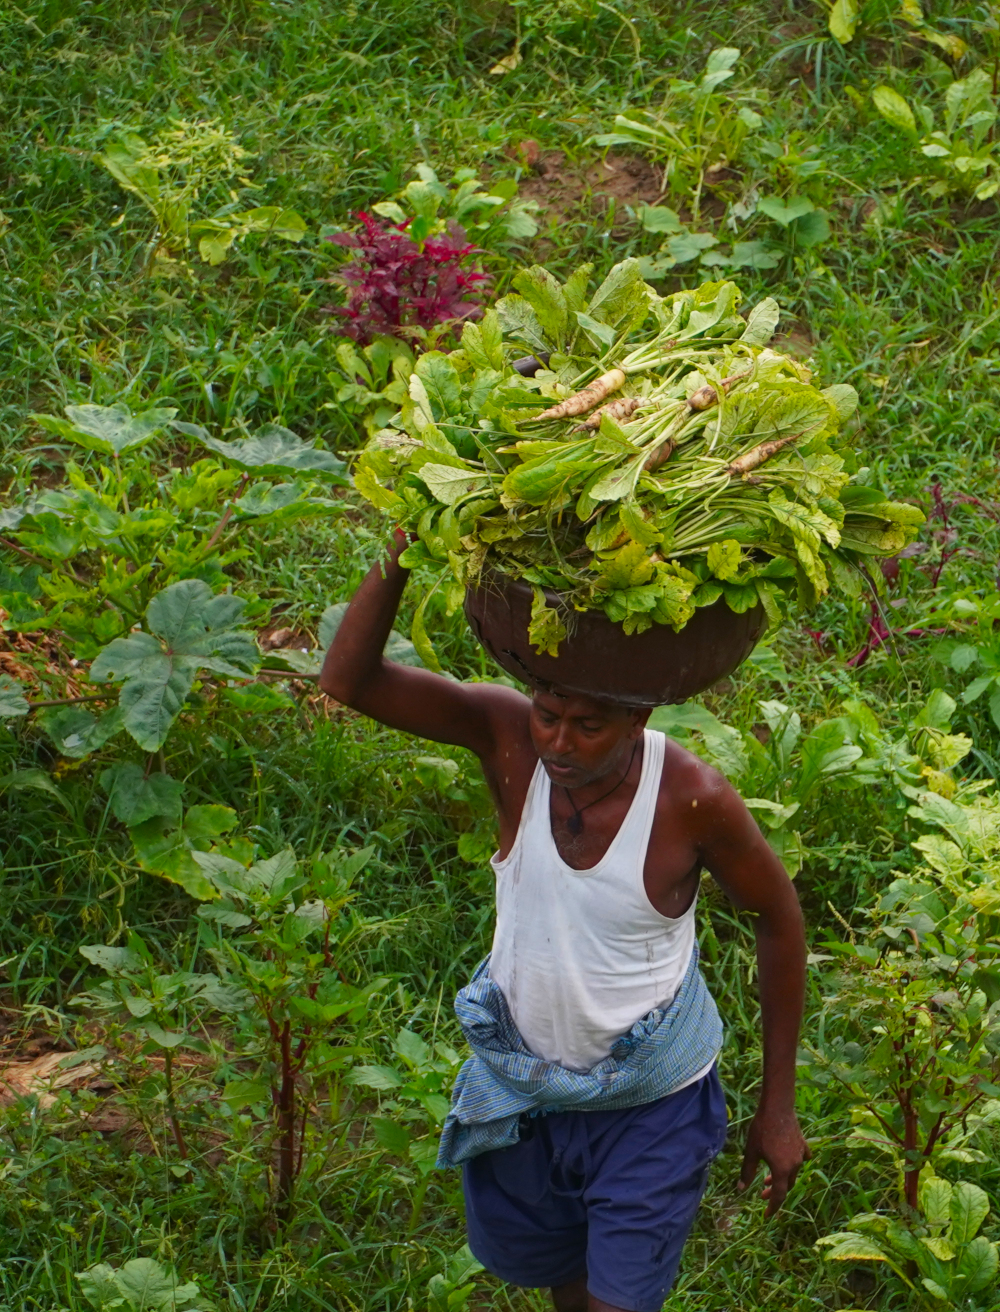 farmer carrying vegetables on his head